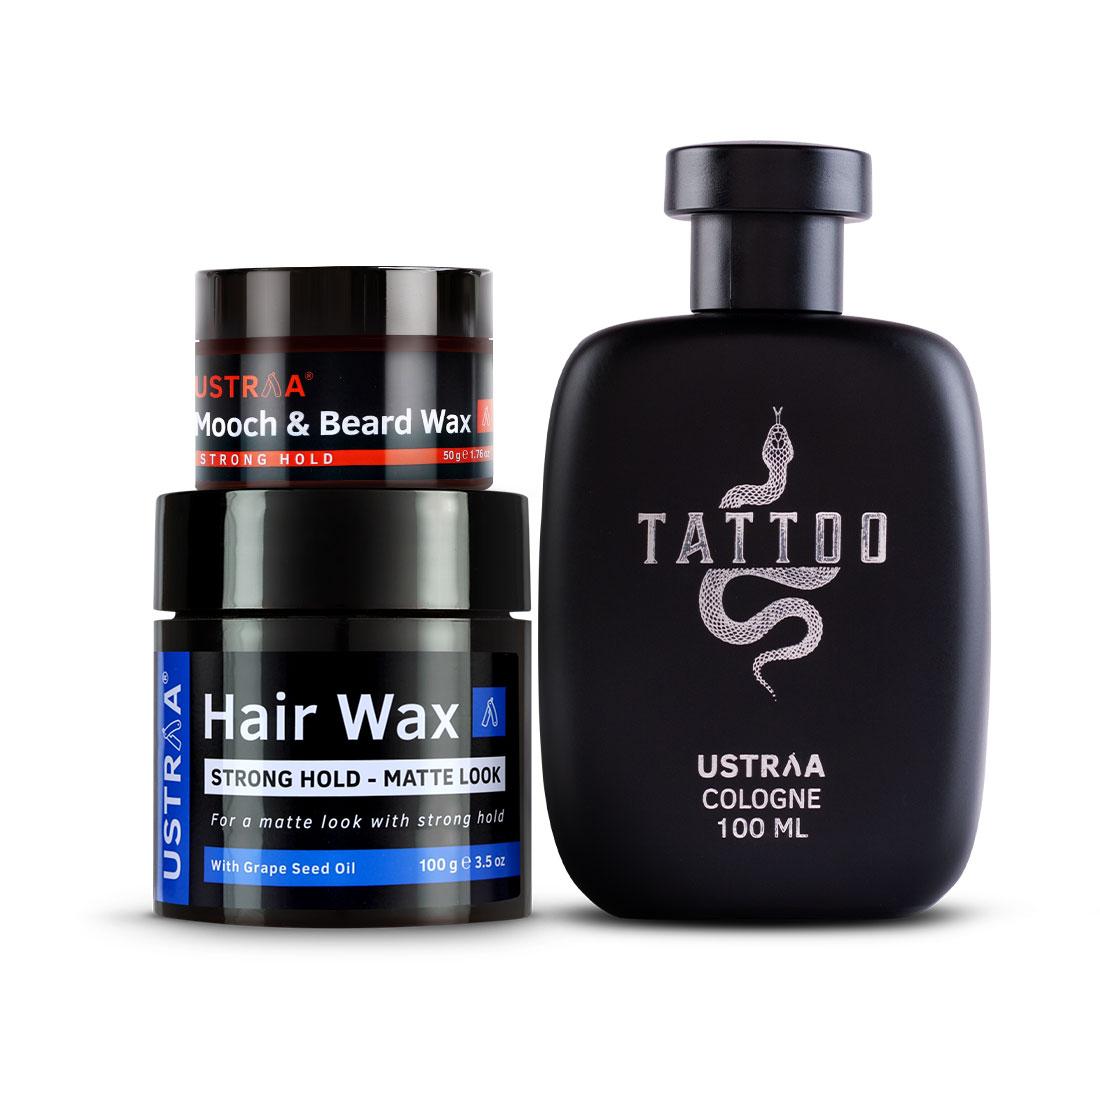 Ustraa Complete Styling Pack For Men: Tattoo Cologne + Mooch & Beard Wax + Hair Wax